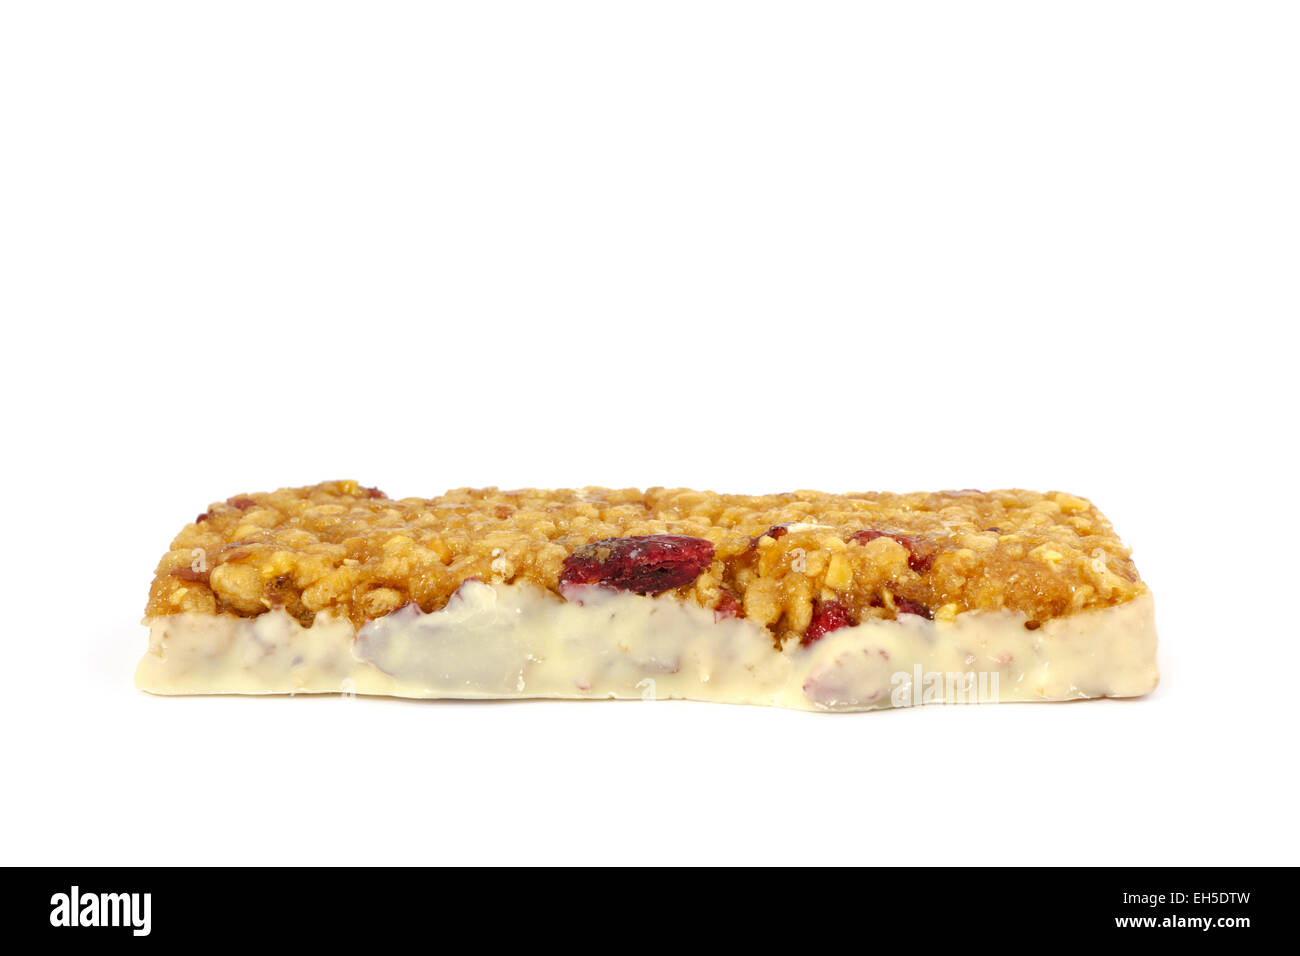 Raw Low carbohydrate bar with cranberries on white background. Stock Photo